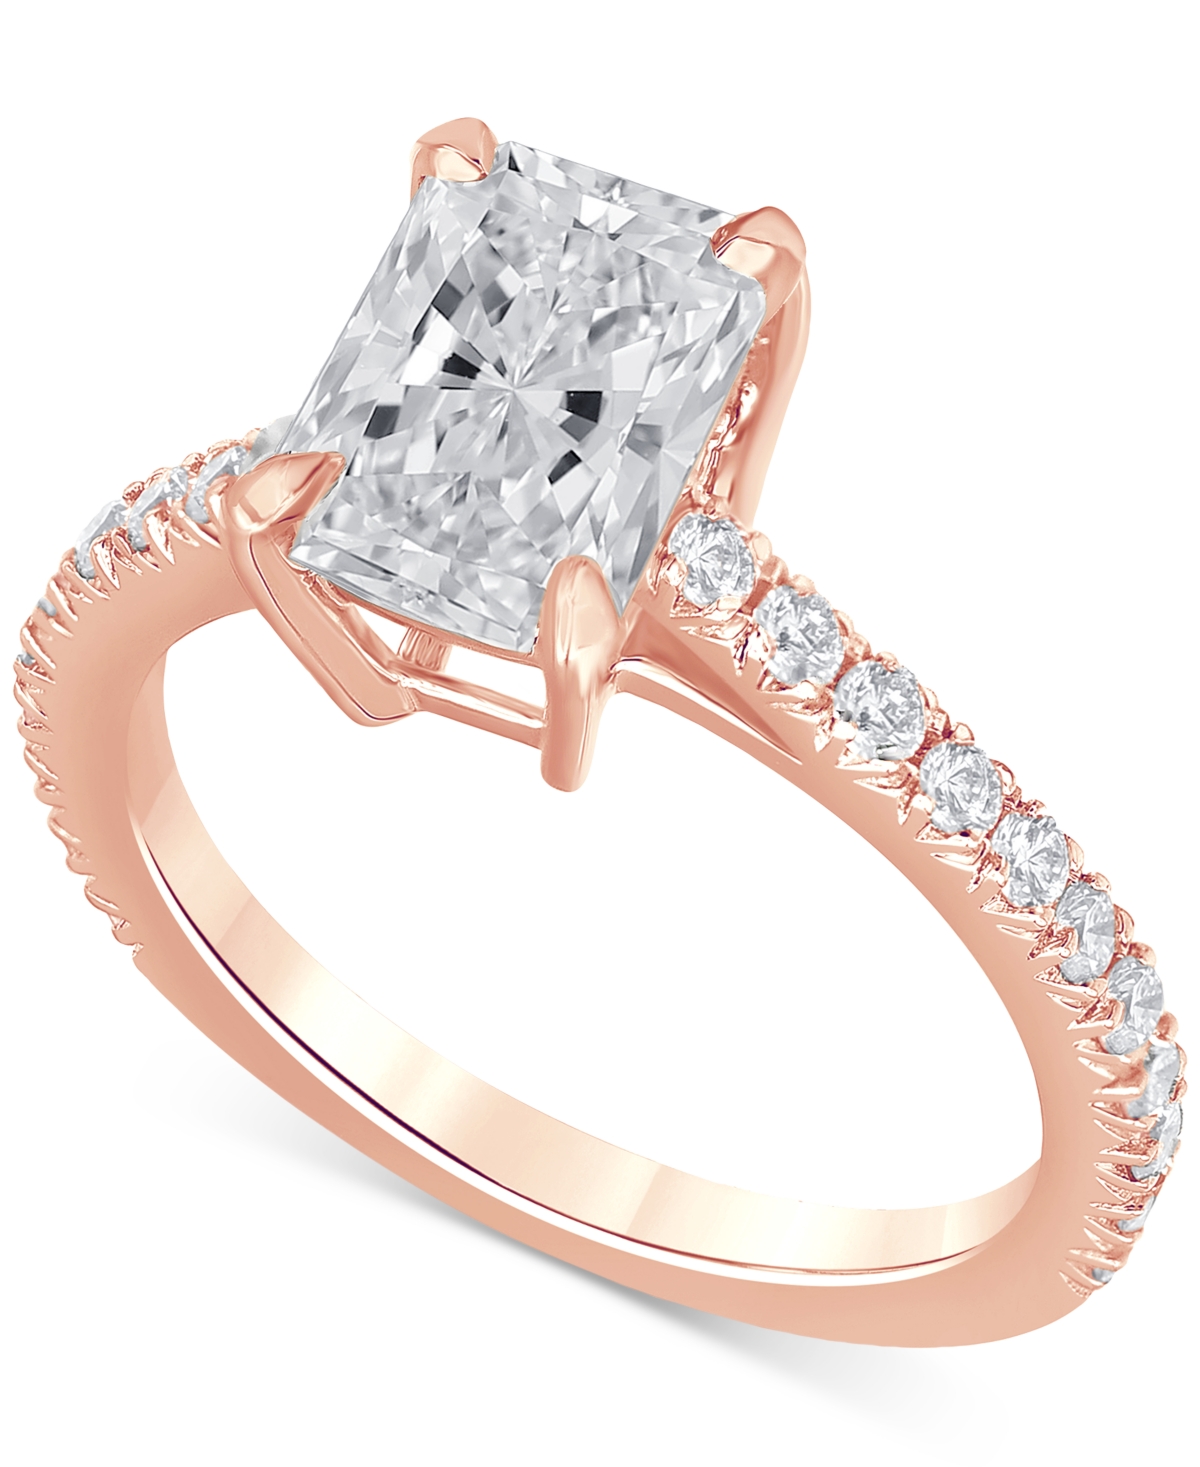 Certified Lab-Grown Diamond Radiant-Cut Engagement Ring (2-1/2 ct. t.w.) in 14k Gold - White Gold